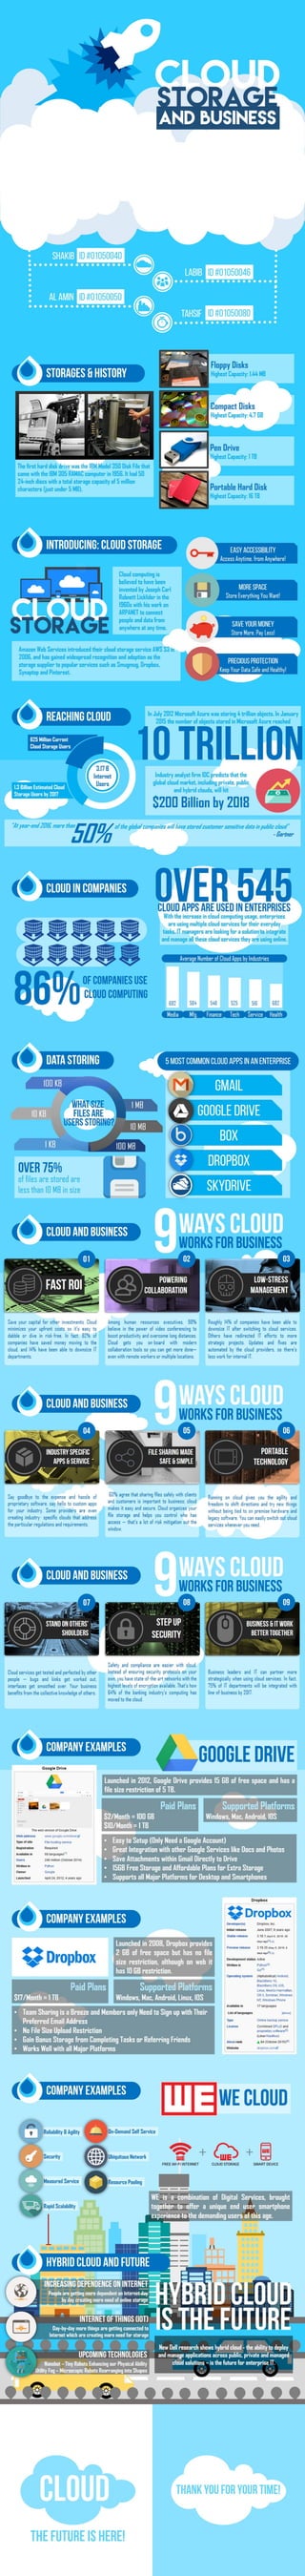 Cloud Storage and Business